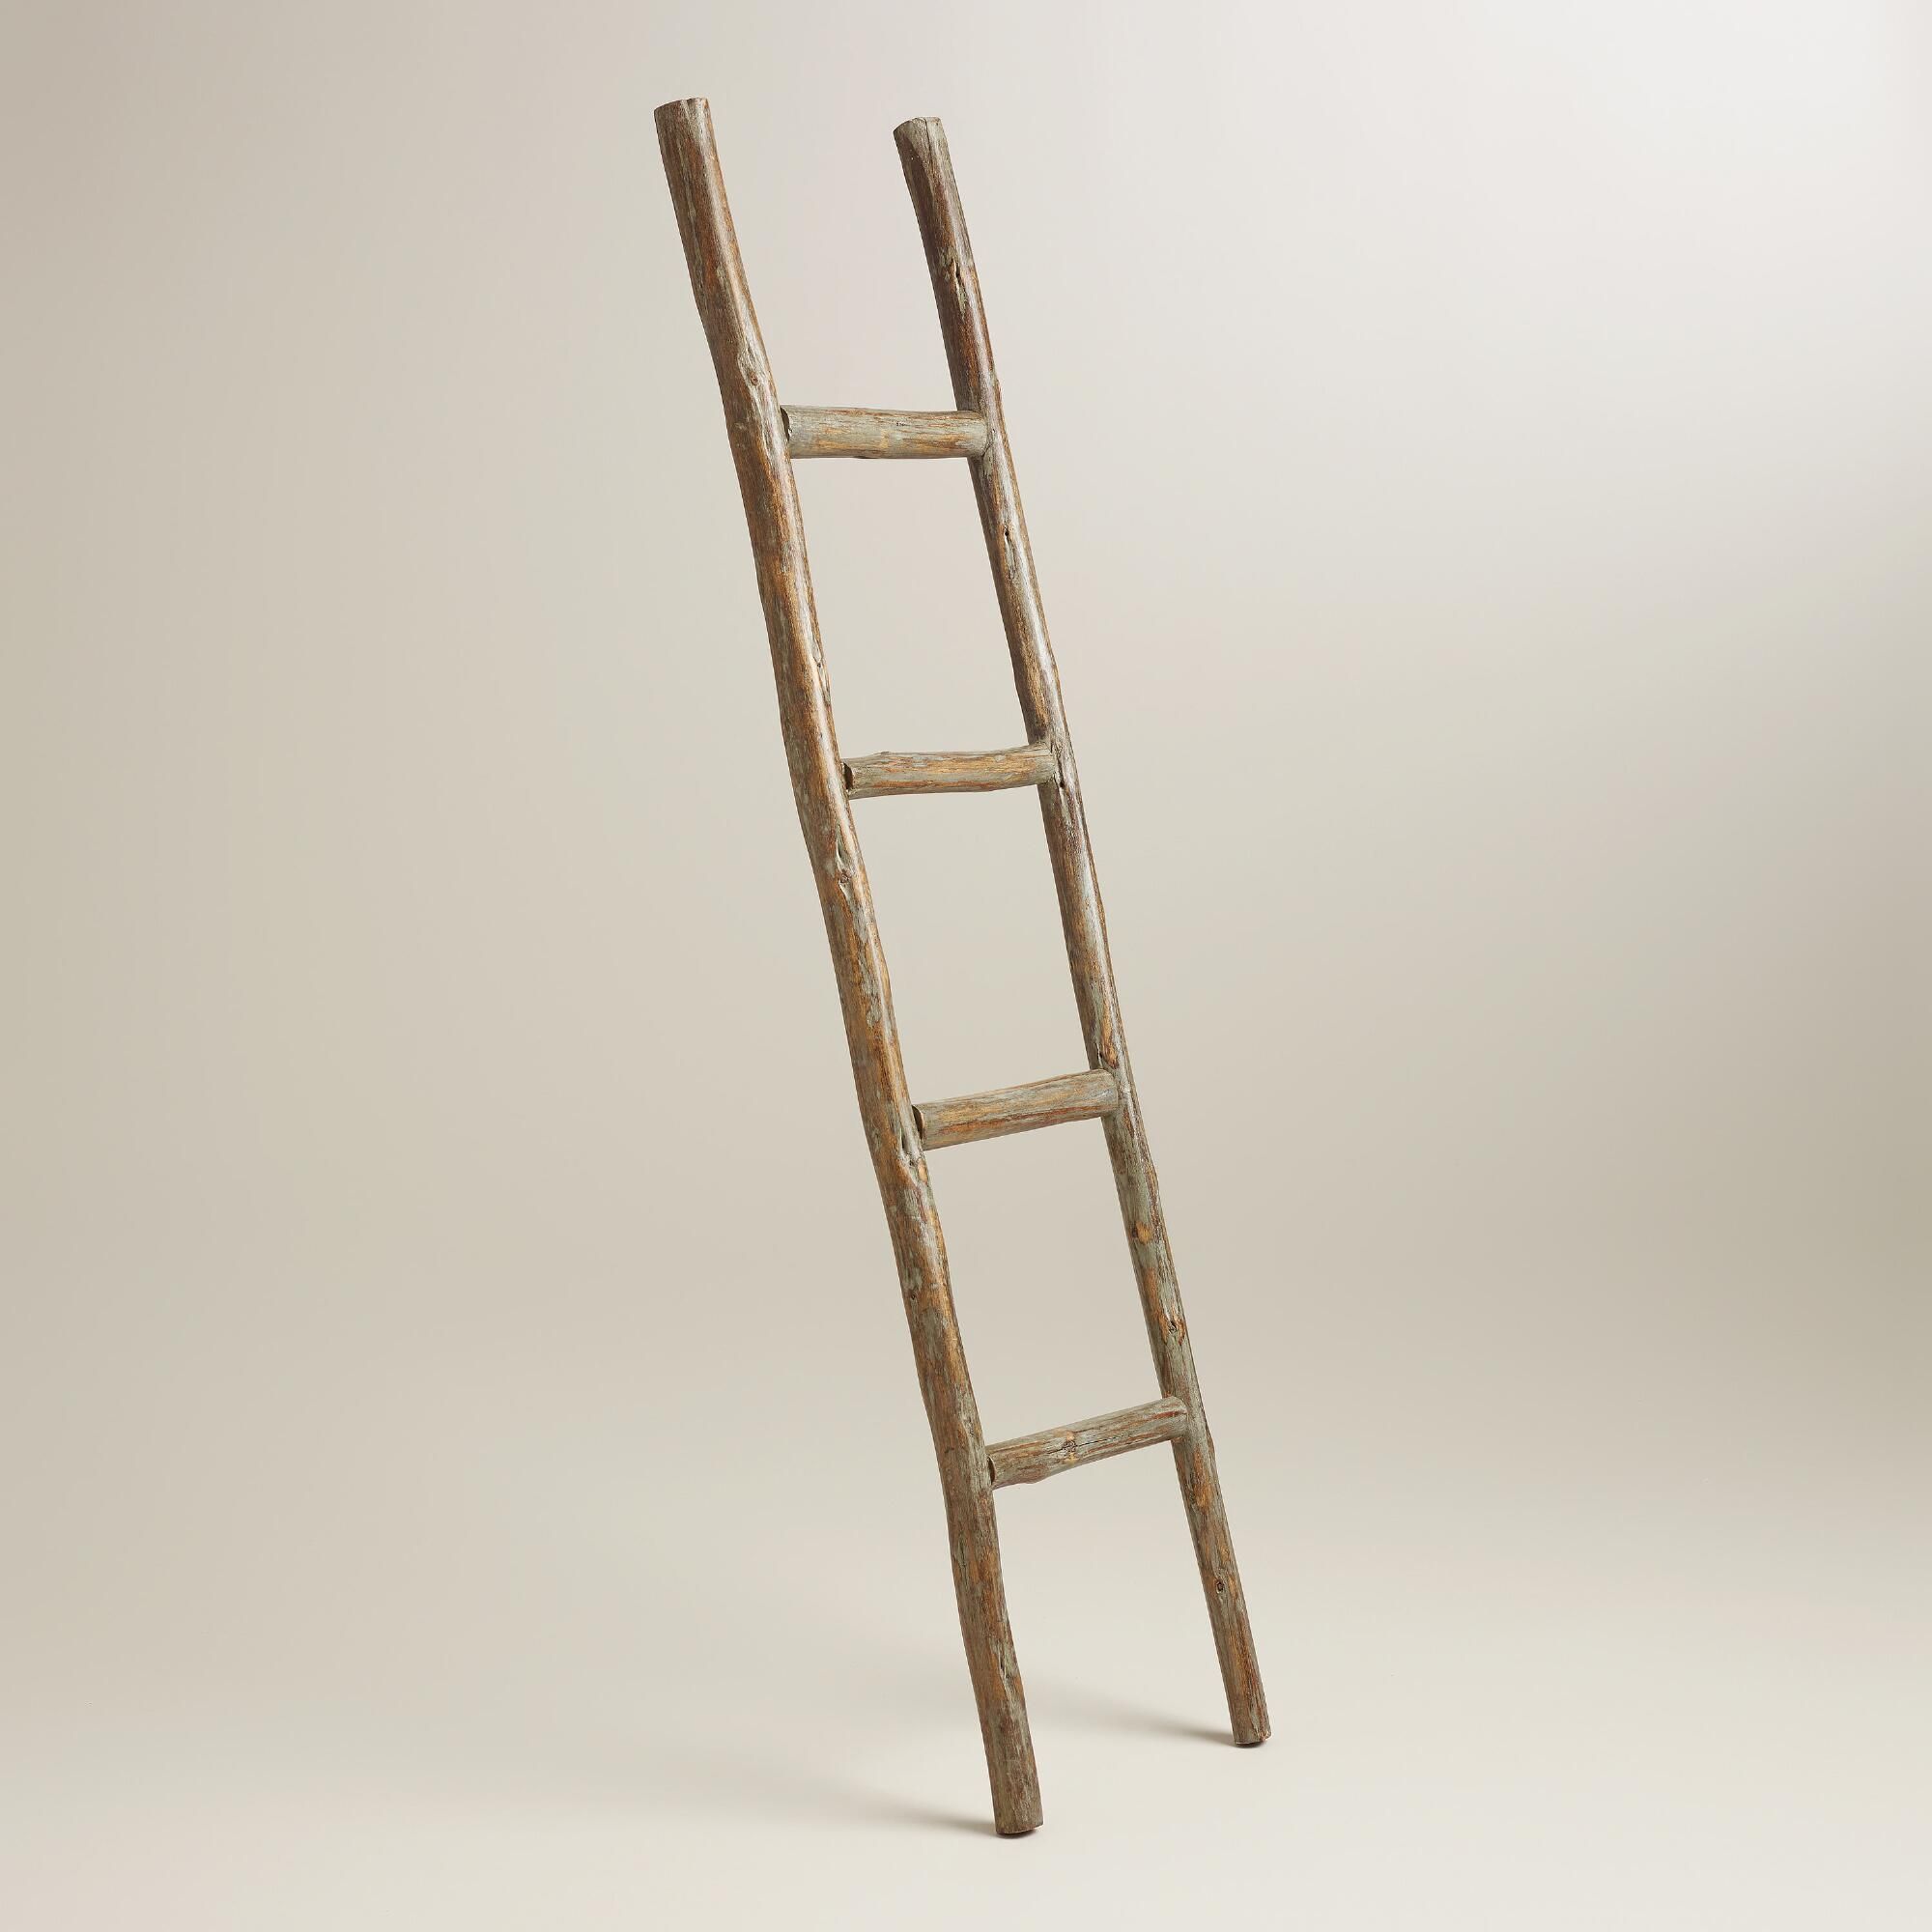 Luxury Rustic Wooden Ladder - hypermallapartments